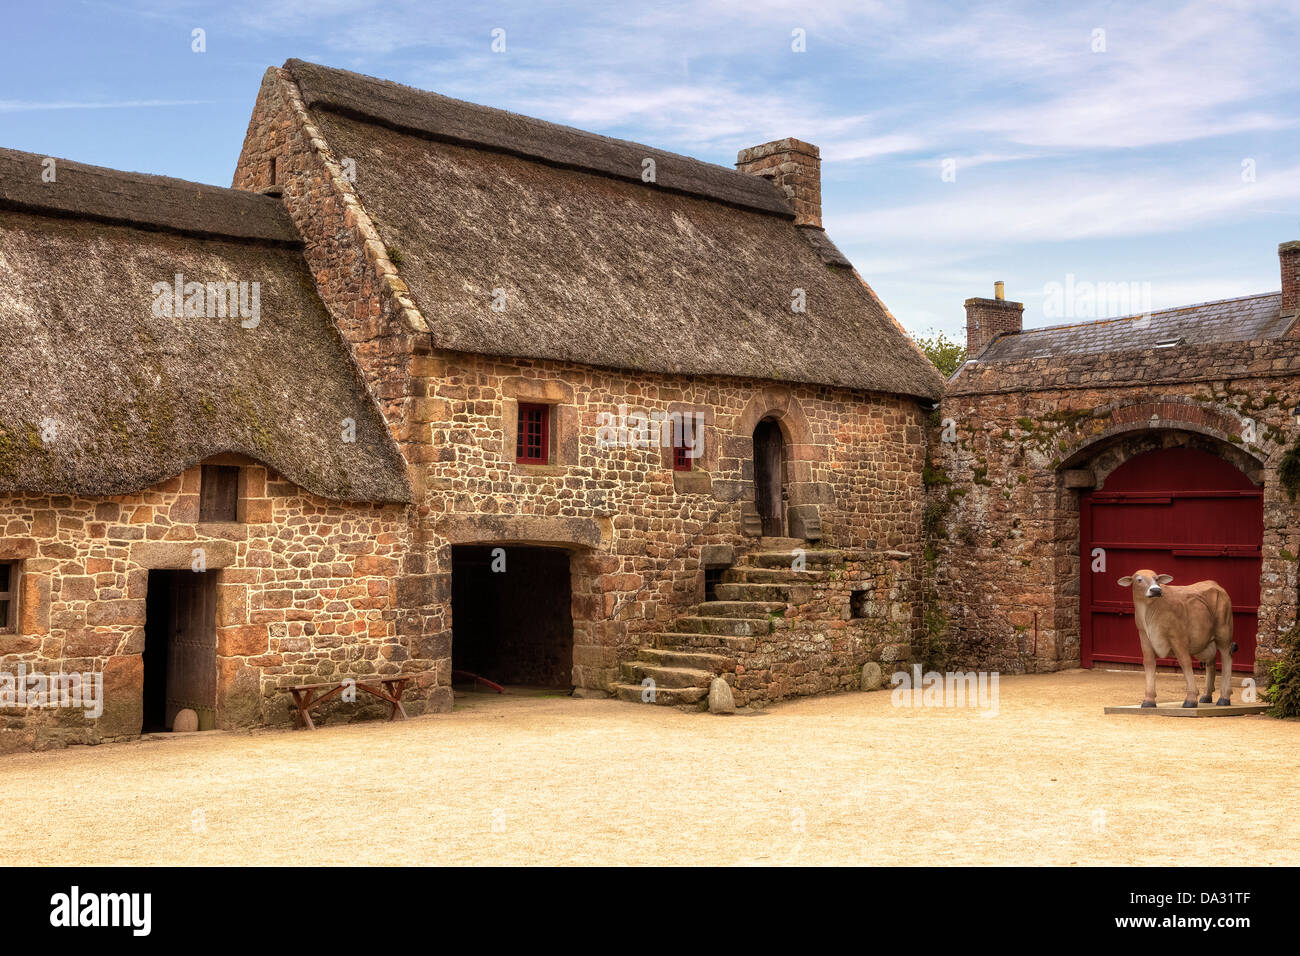 Hamptonne Country Life Museum, Jersey, United Kingdom Banque D'Images